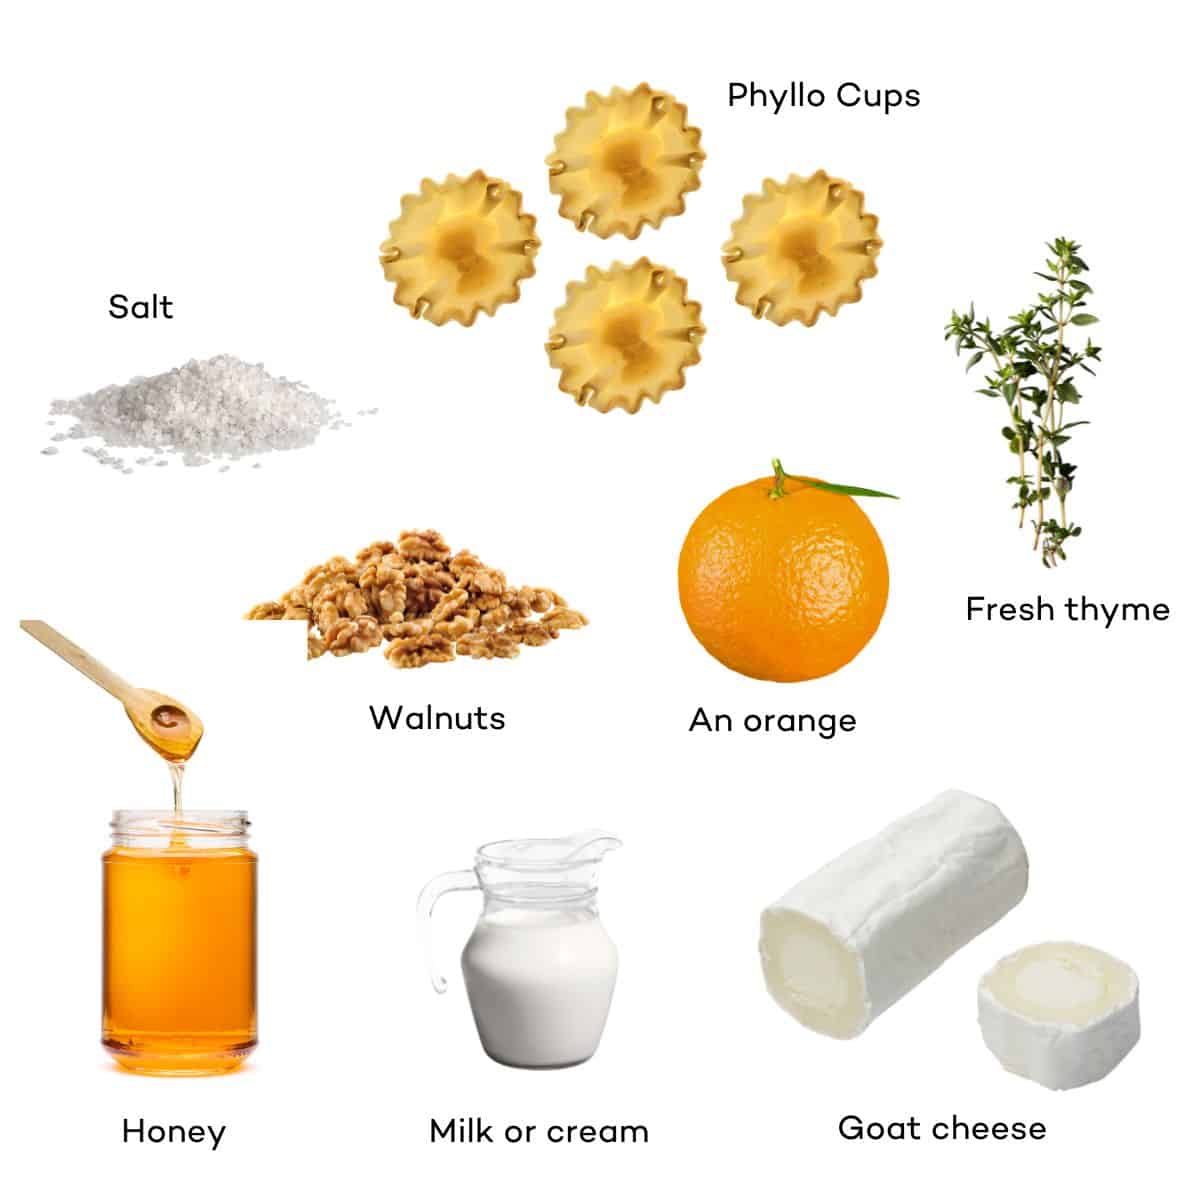 Ingredients for Honey, Walnut, and Goat Cheese Phyllo Cup Appetizers